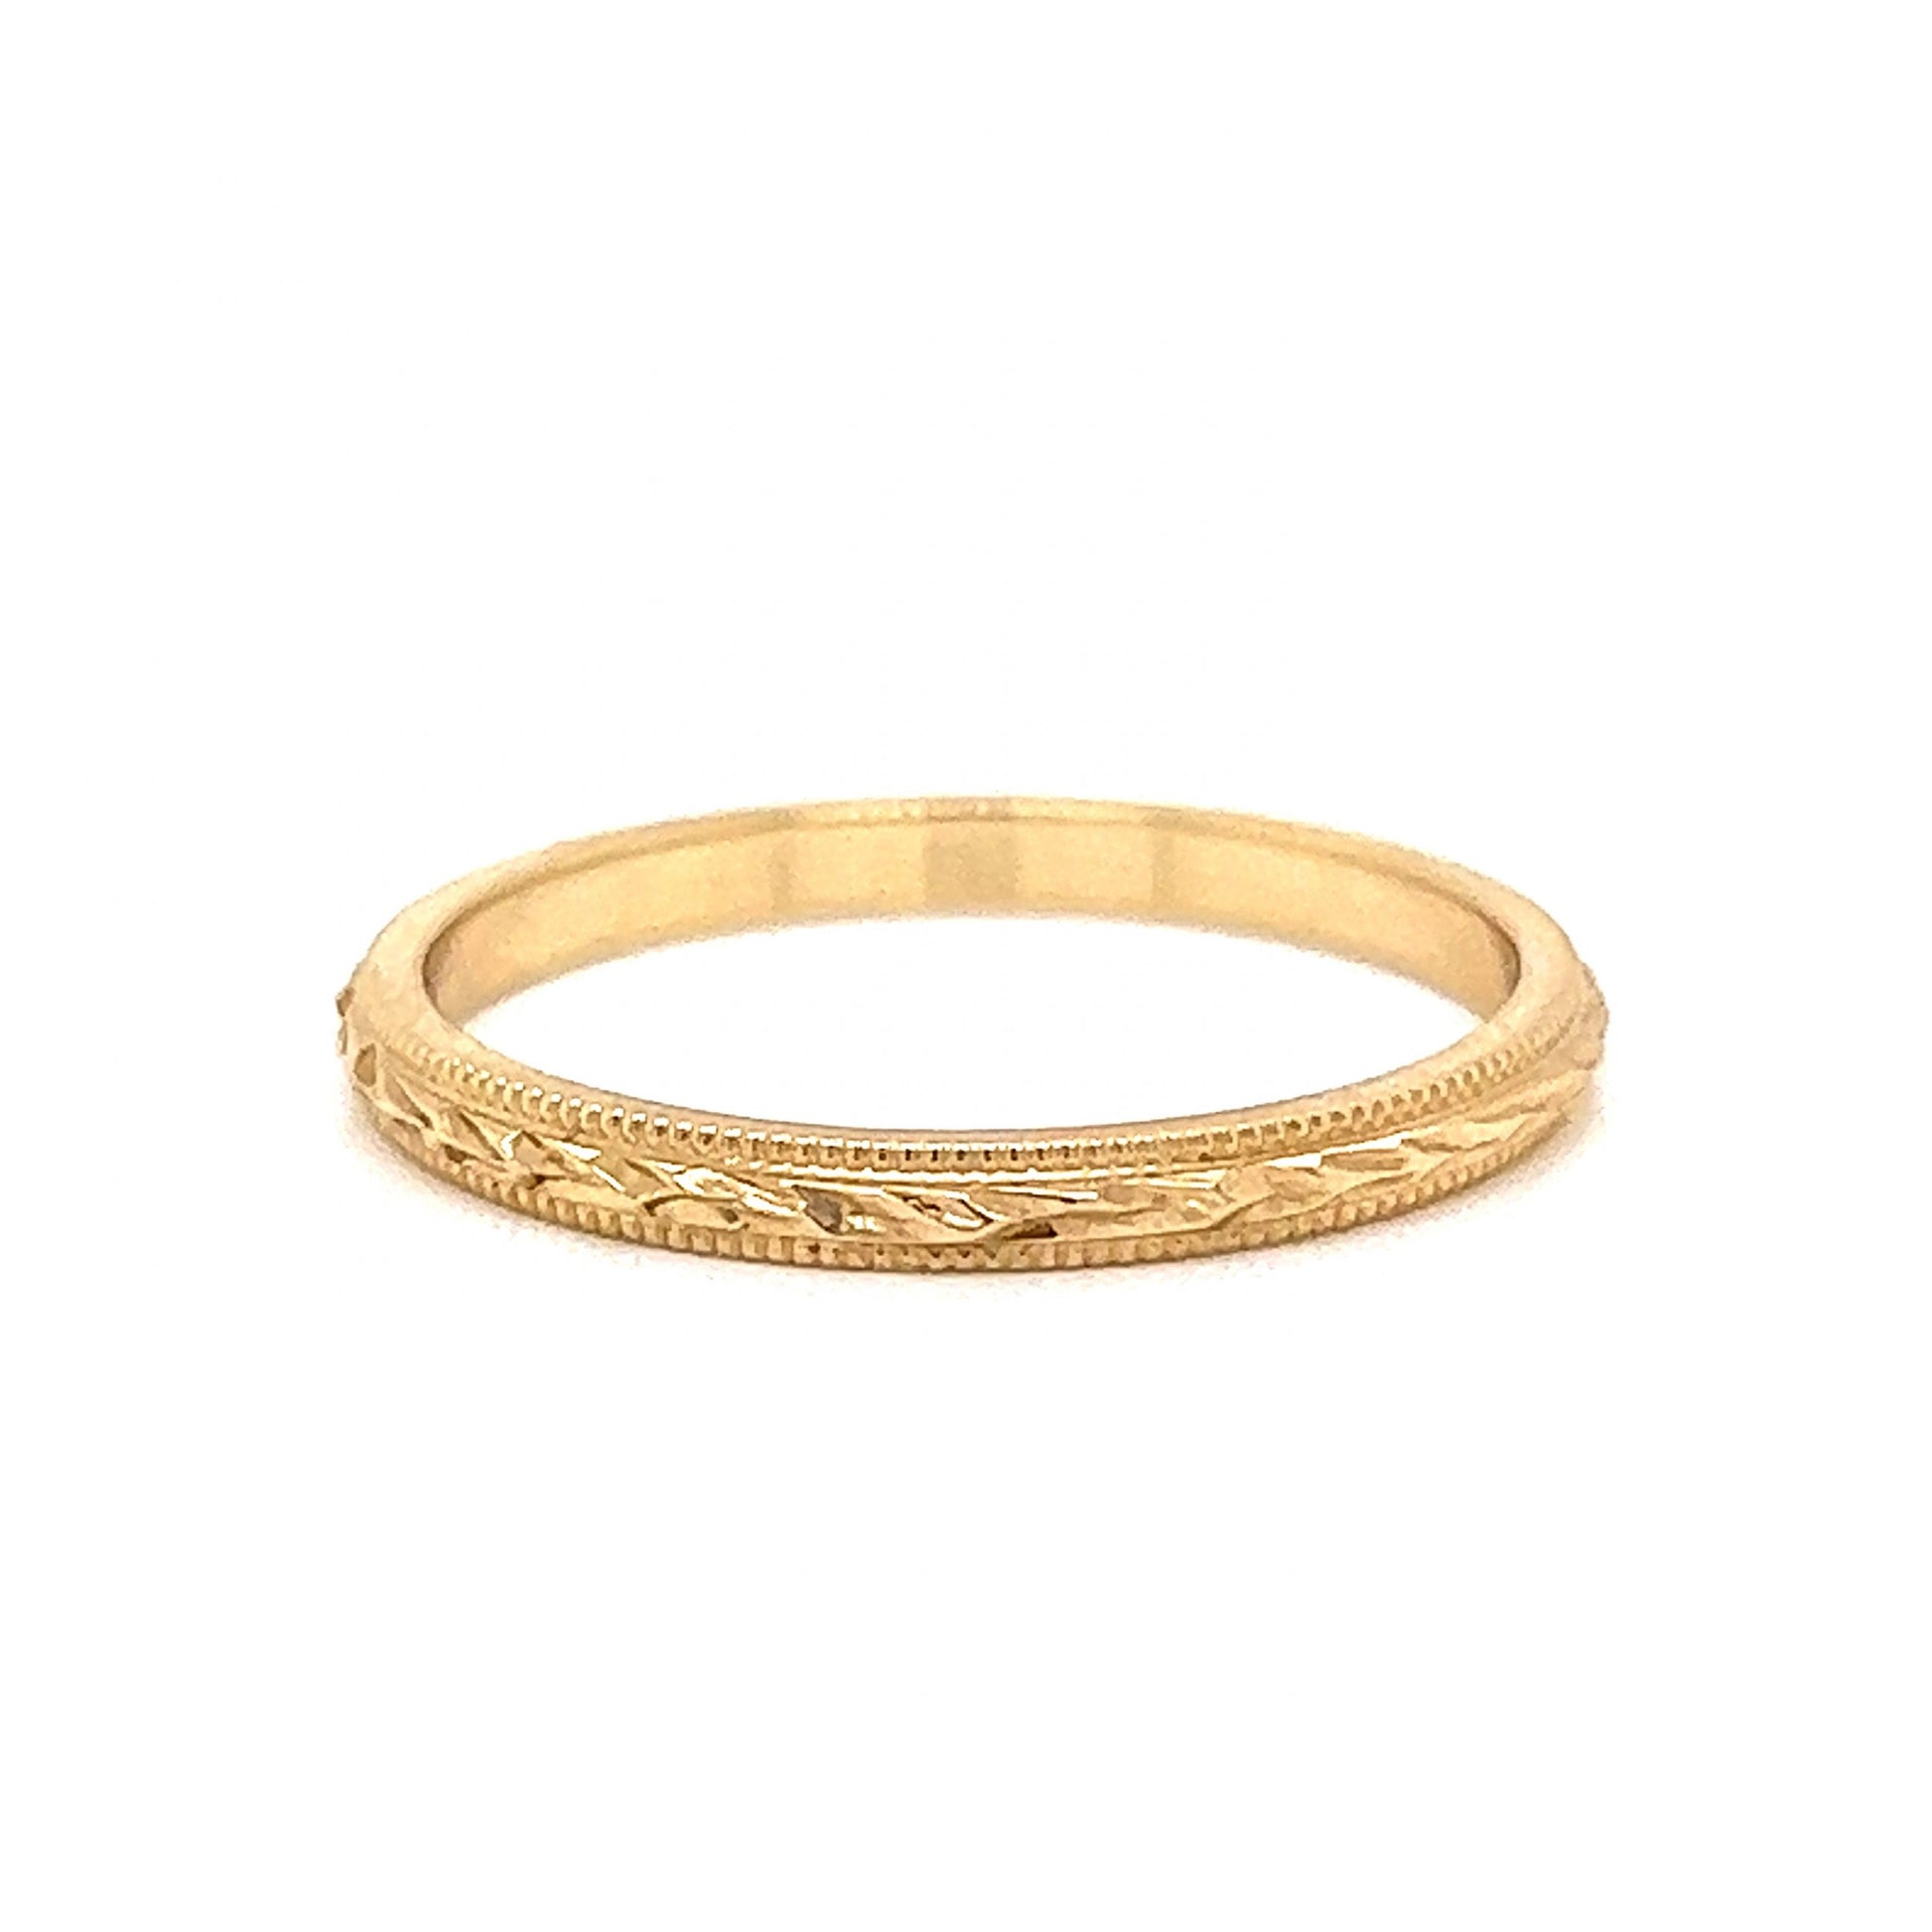 Antique Inspired Engraved Wedding Band in 14k Yellow GoldComposition: 14 Karat Yellow GoldRing Size: 7Total Gram Weight: 1.7 gInscription: 14k B&N